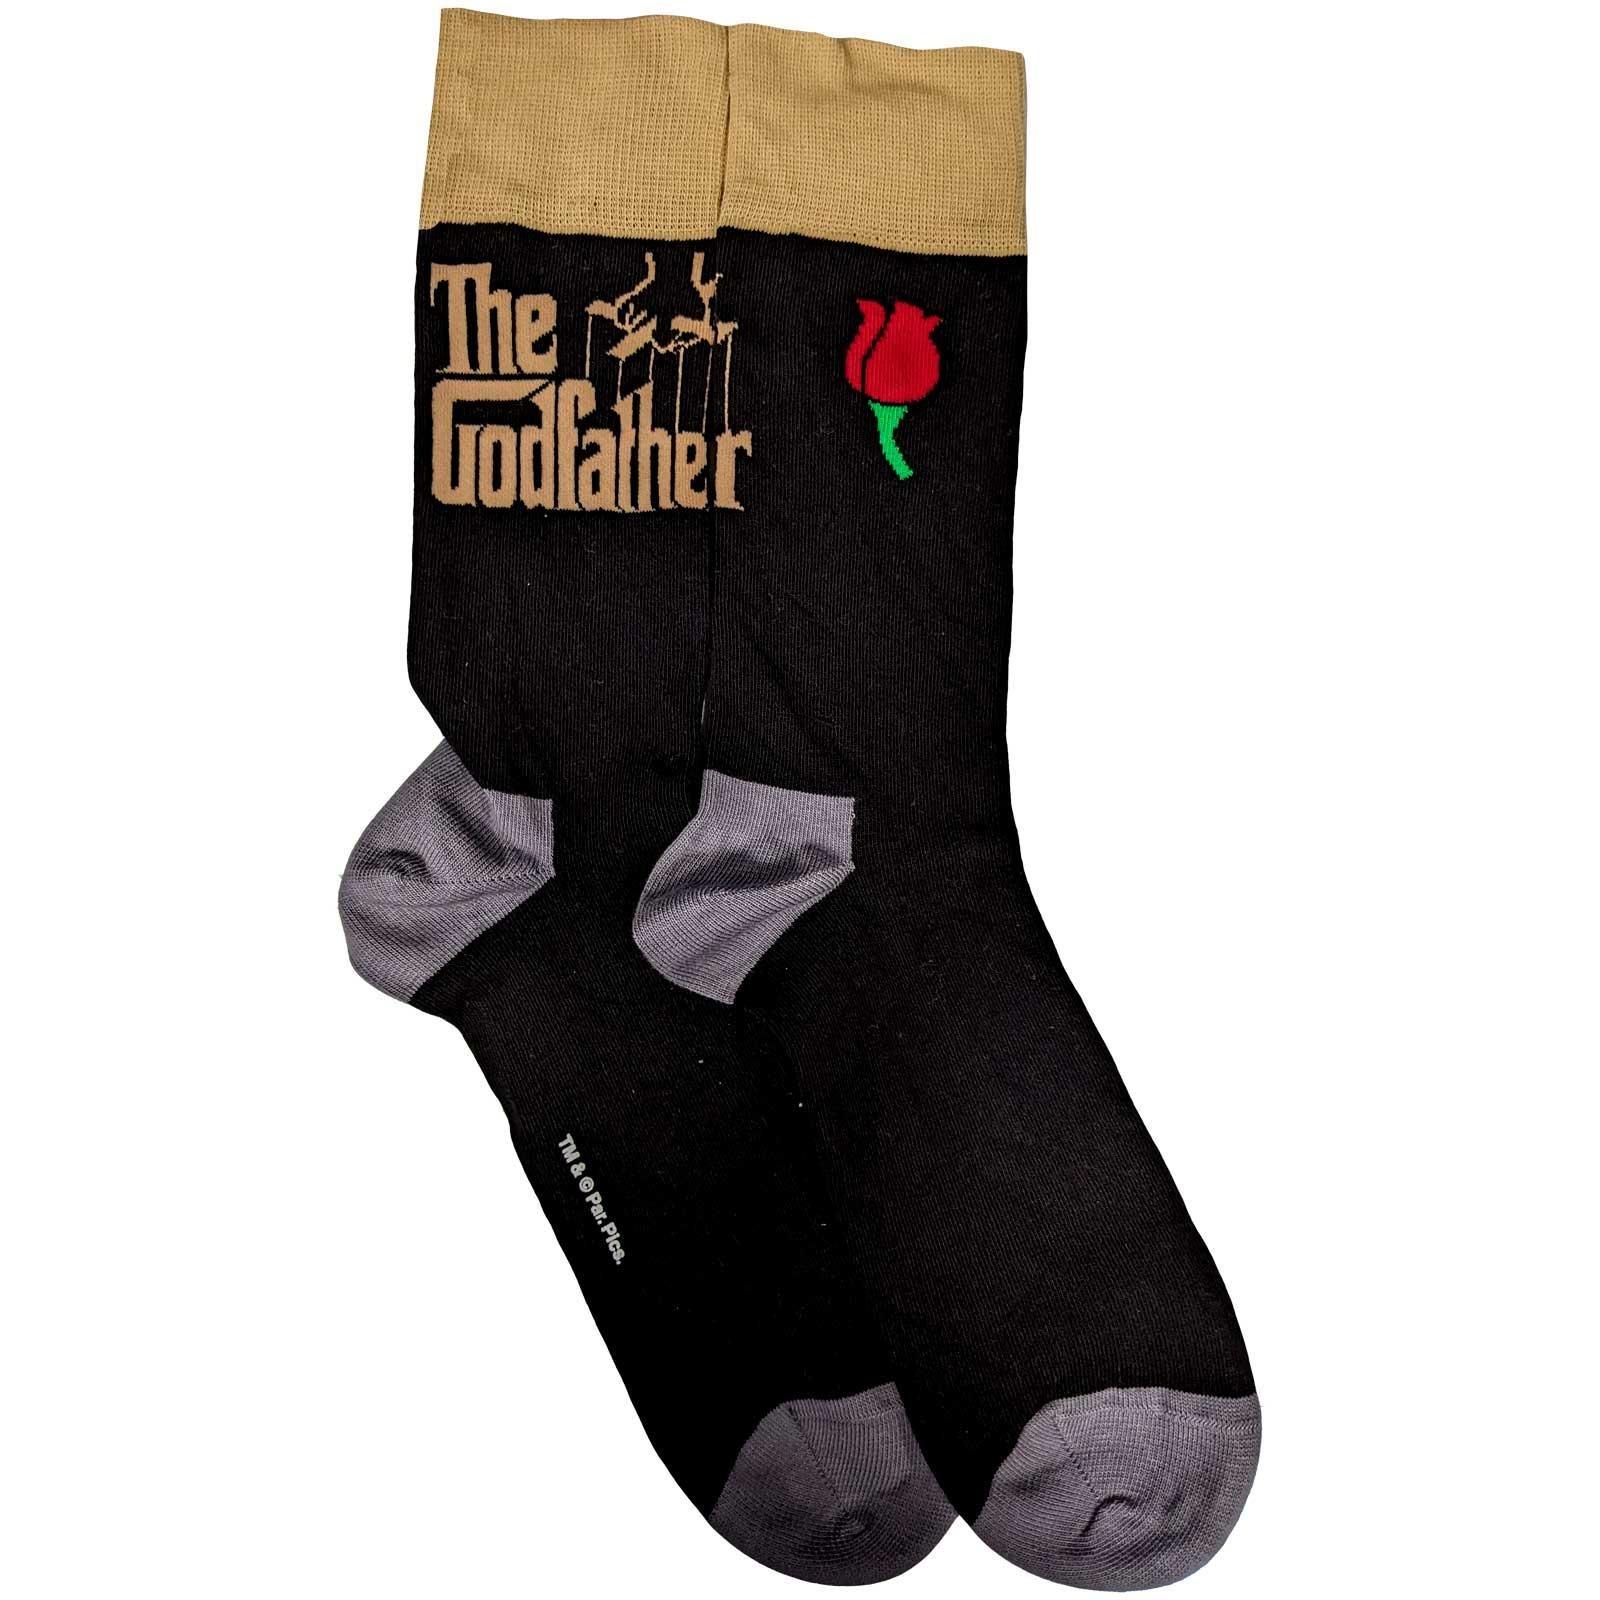 The Godfather  Socquettes 